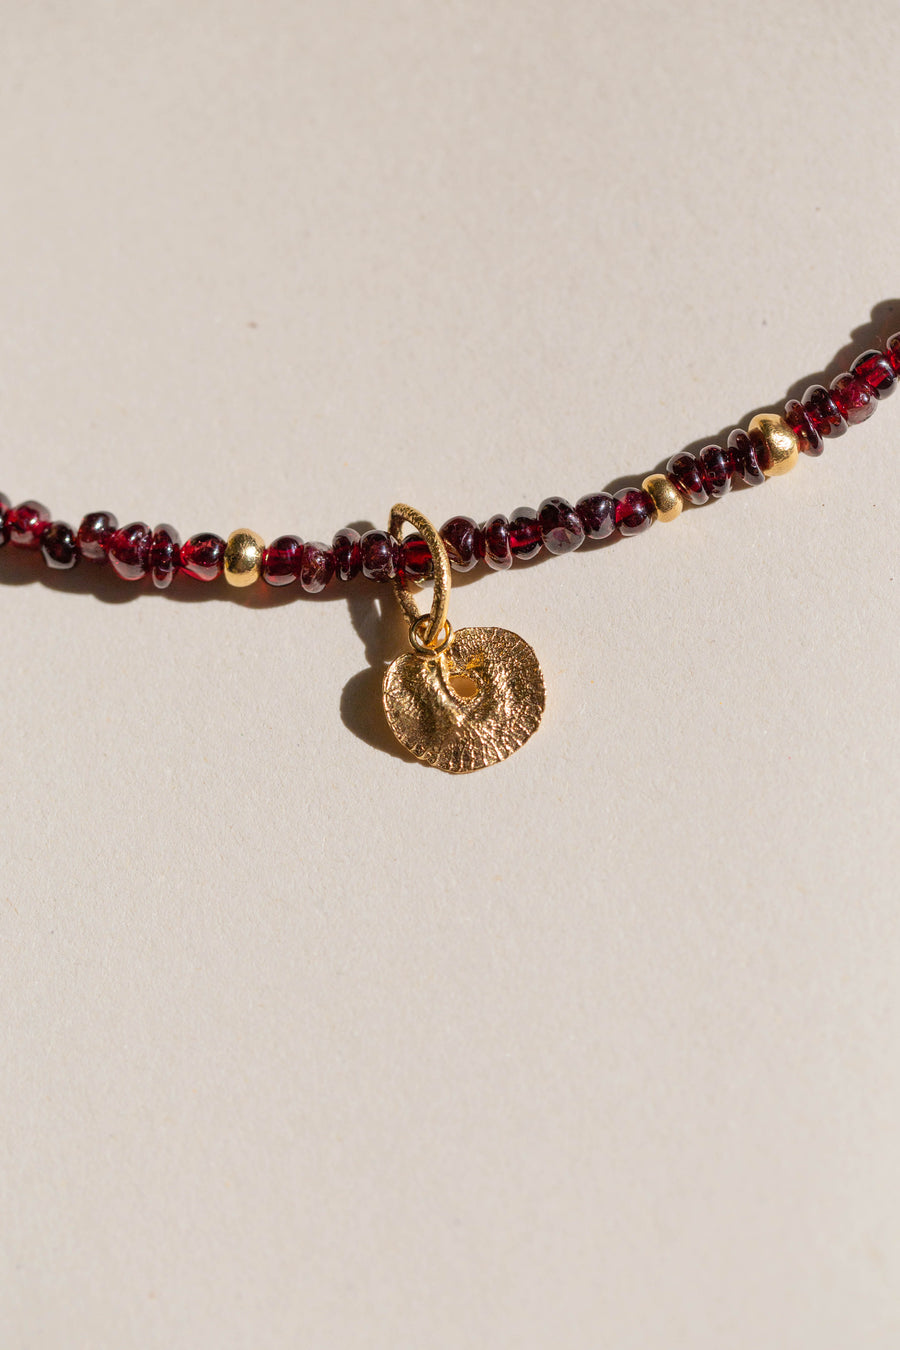 RA NECKLACE WITH GARNET + PENDANT